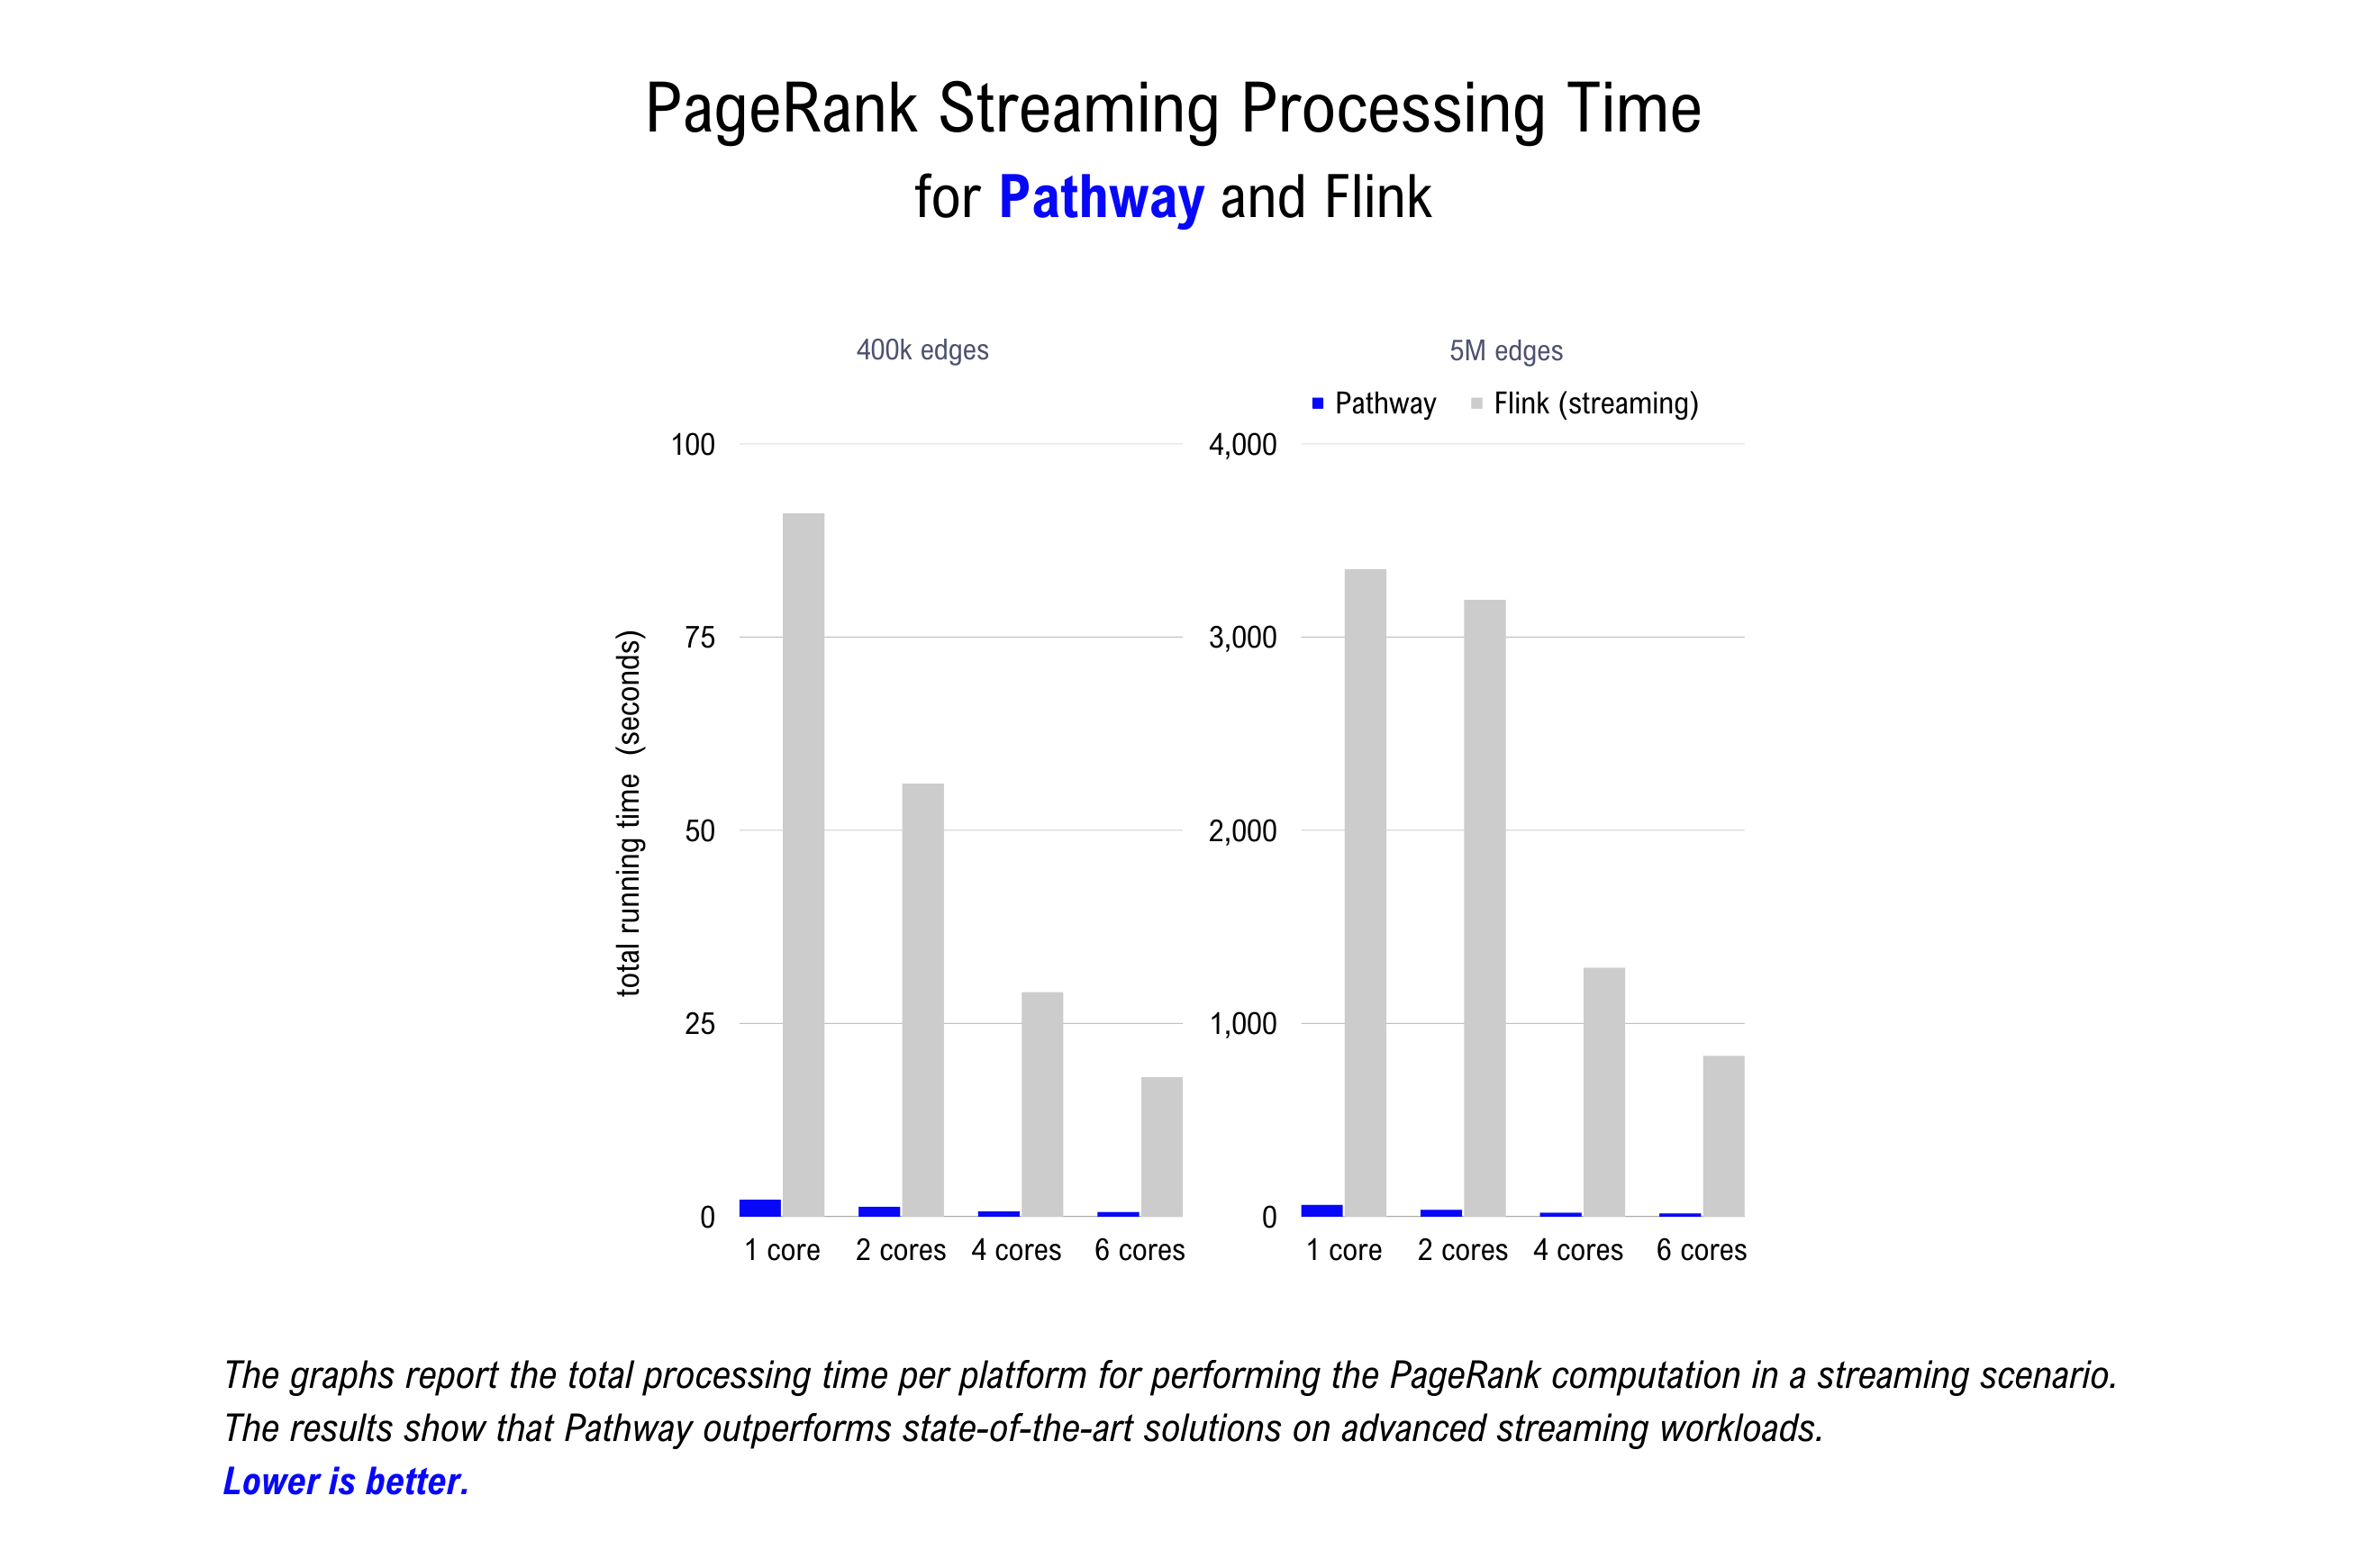 PageRank Streaming Results